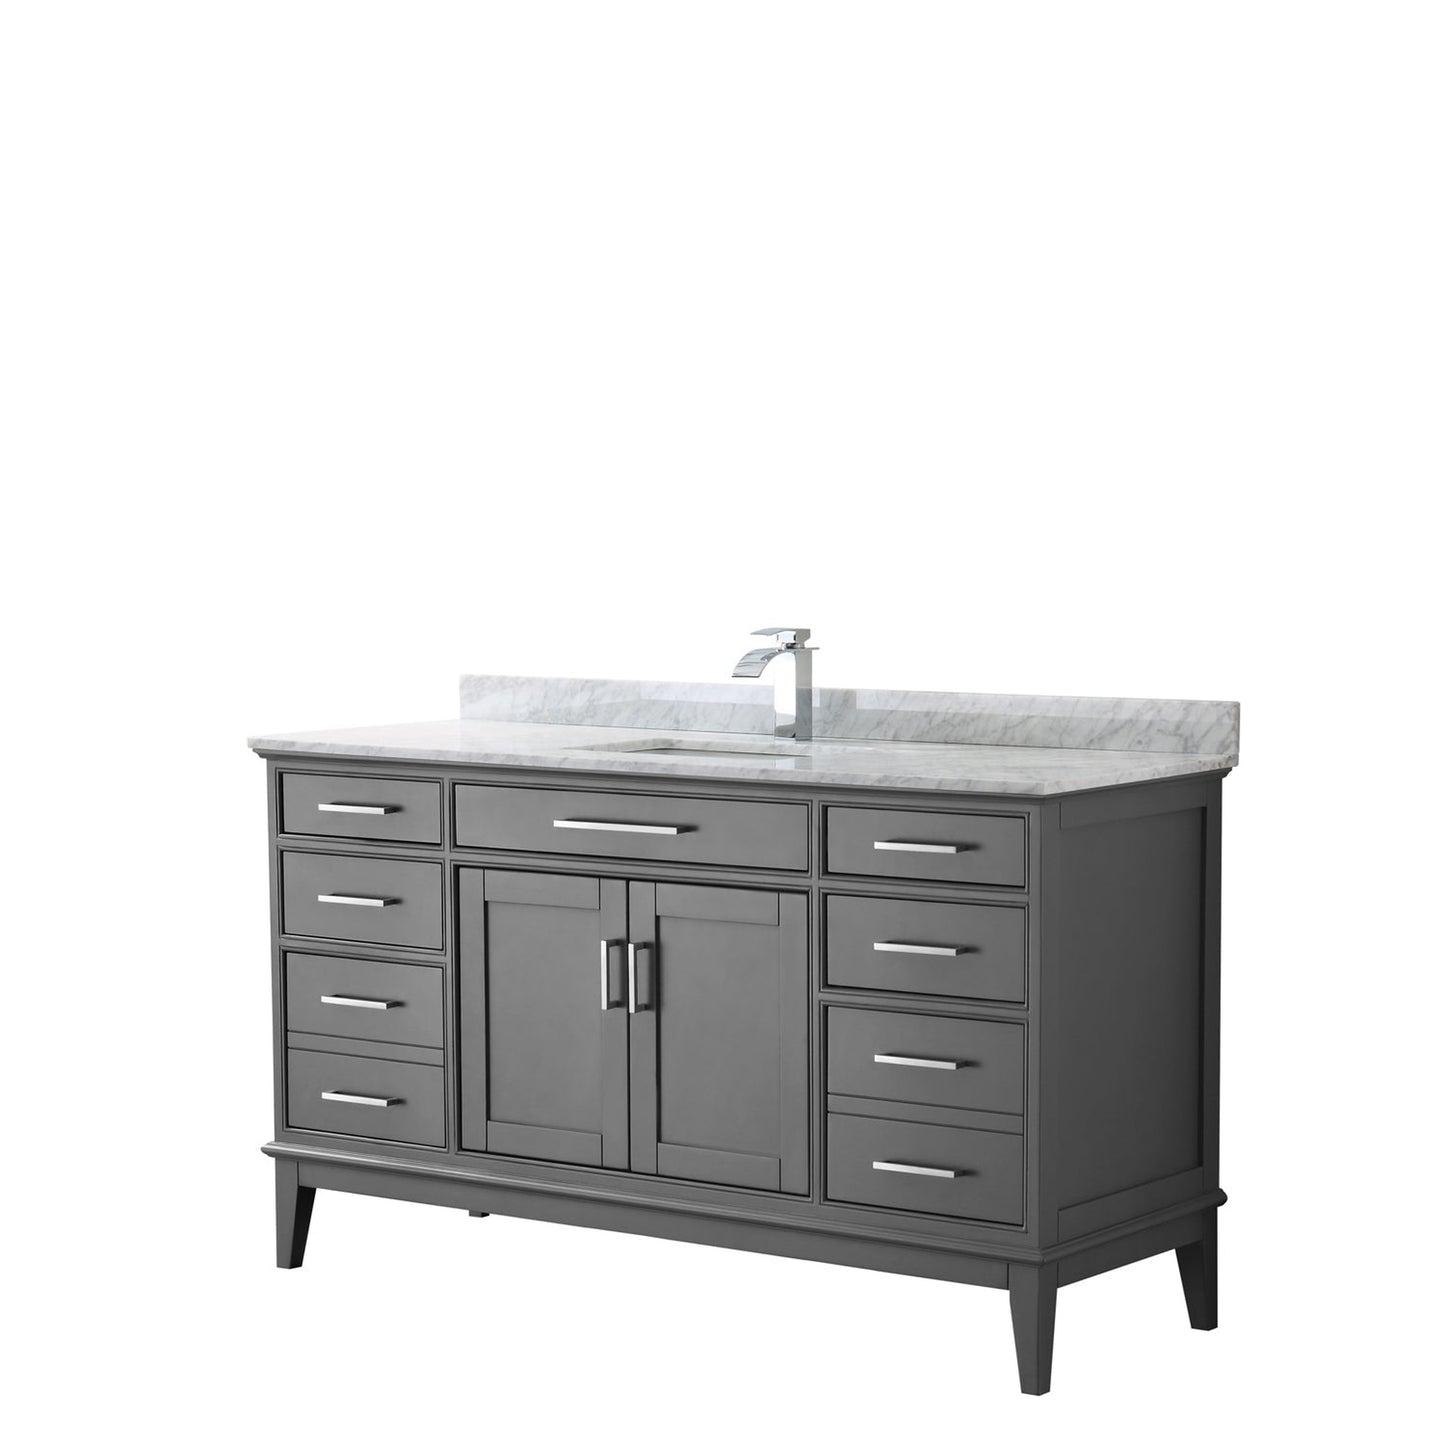 Wyndham Collection Margate 60" Single Bathroom Dark Gray Vanity With White Carrara Marble Countertop And Undermount Square Sink